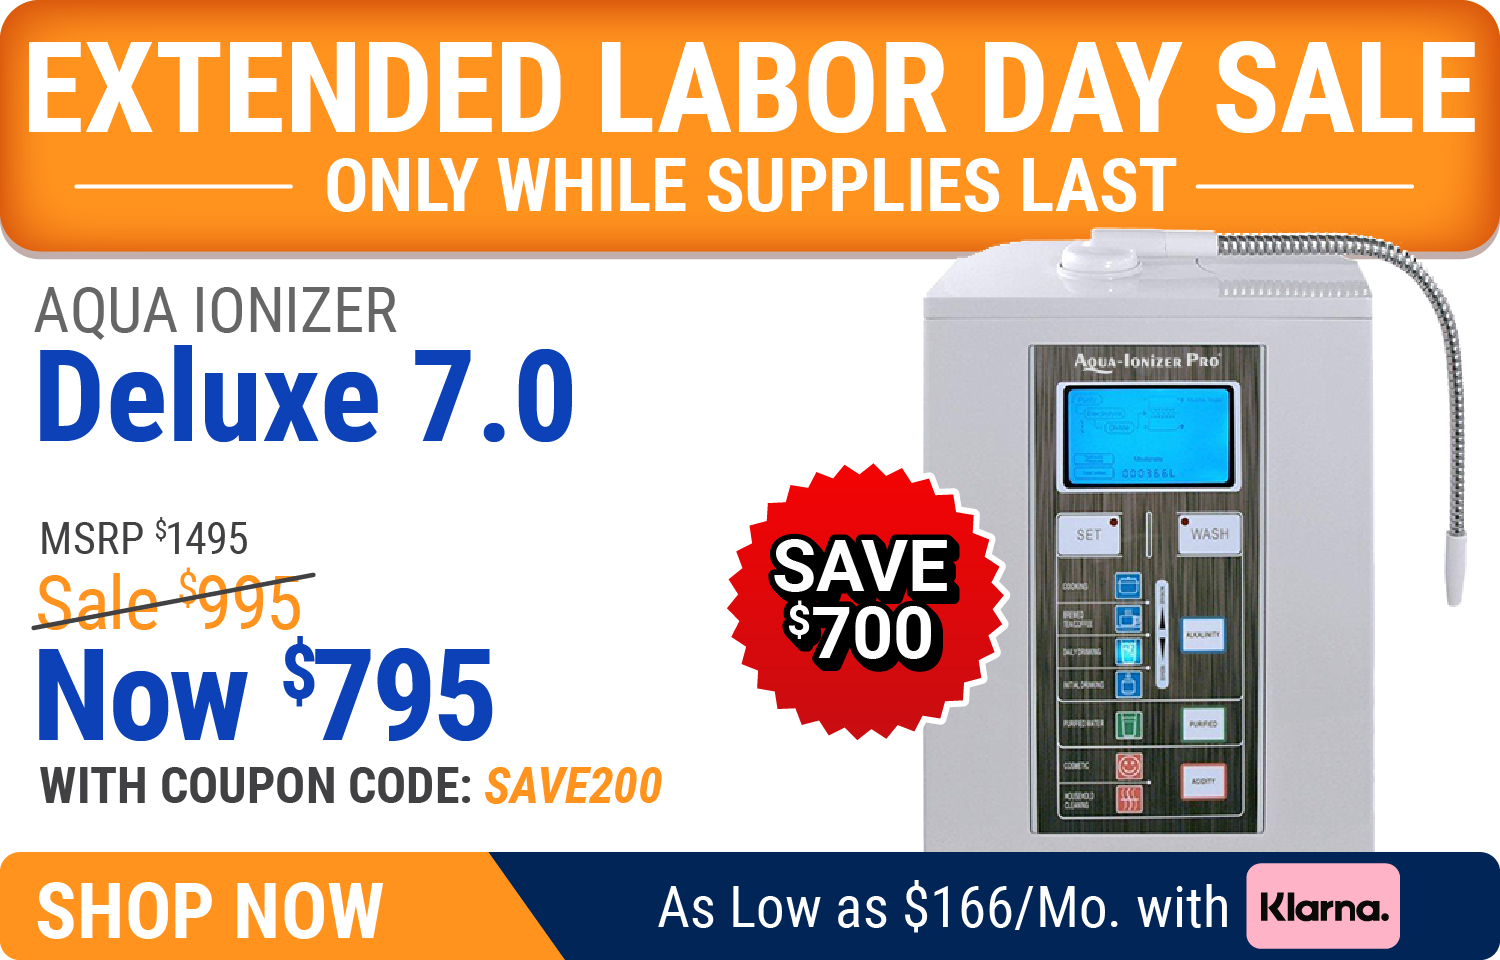 Extended Labor Day Sale - Save $700 on Aqua Ionizer Deluxe 7.0 While Supplies Last. Only $795